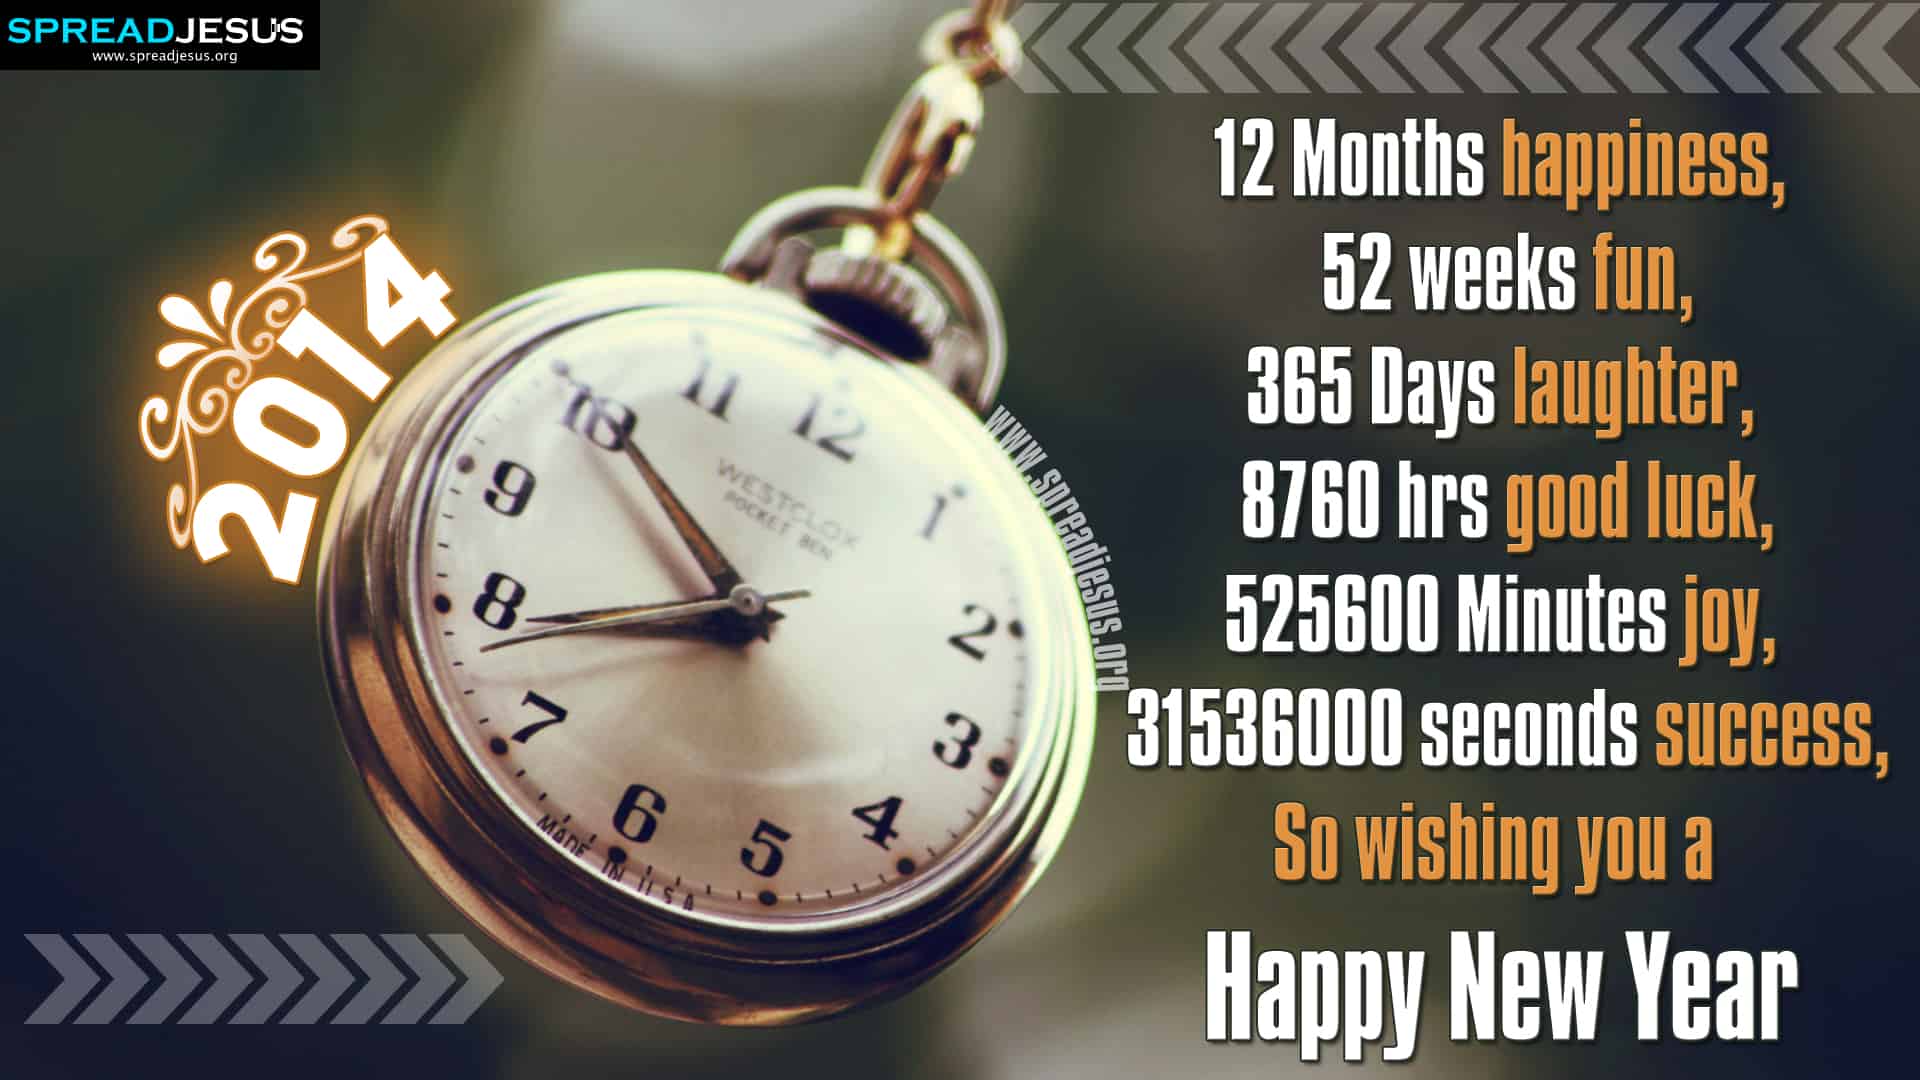 HAPPY NEW YEAR 2014 GREETINGS HD-WALLPAPERS